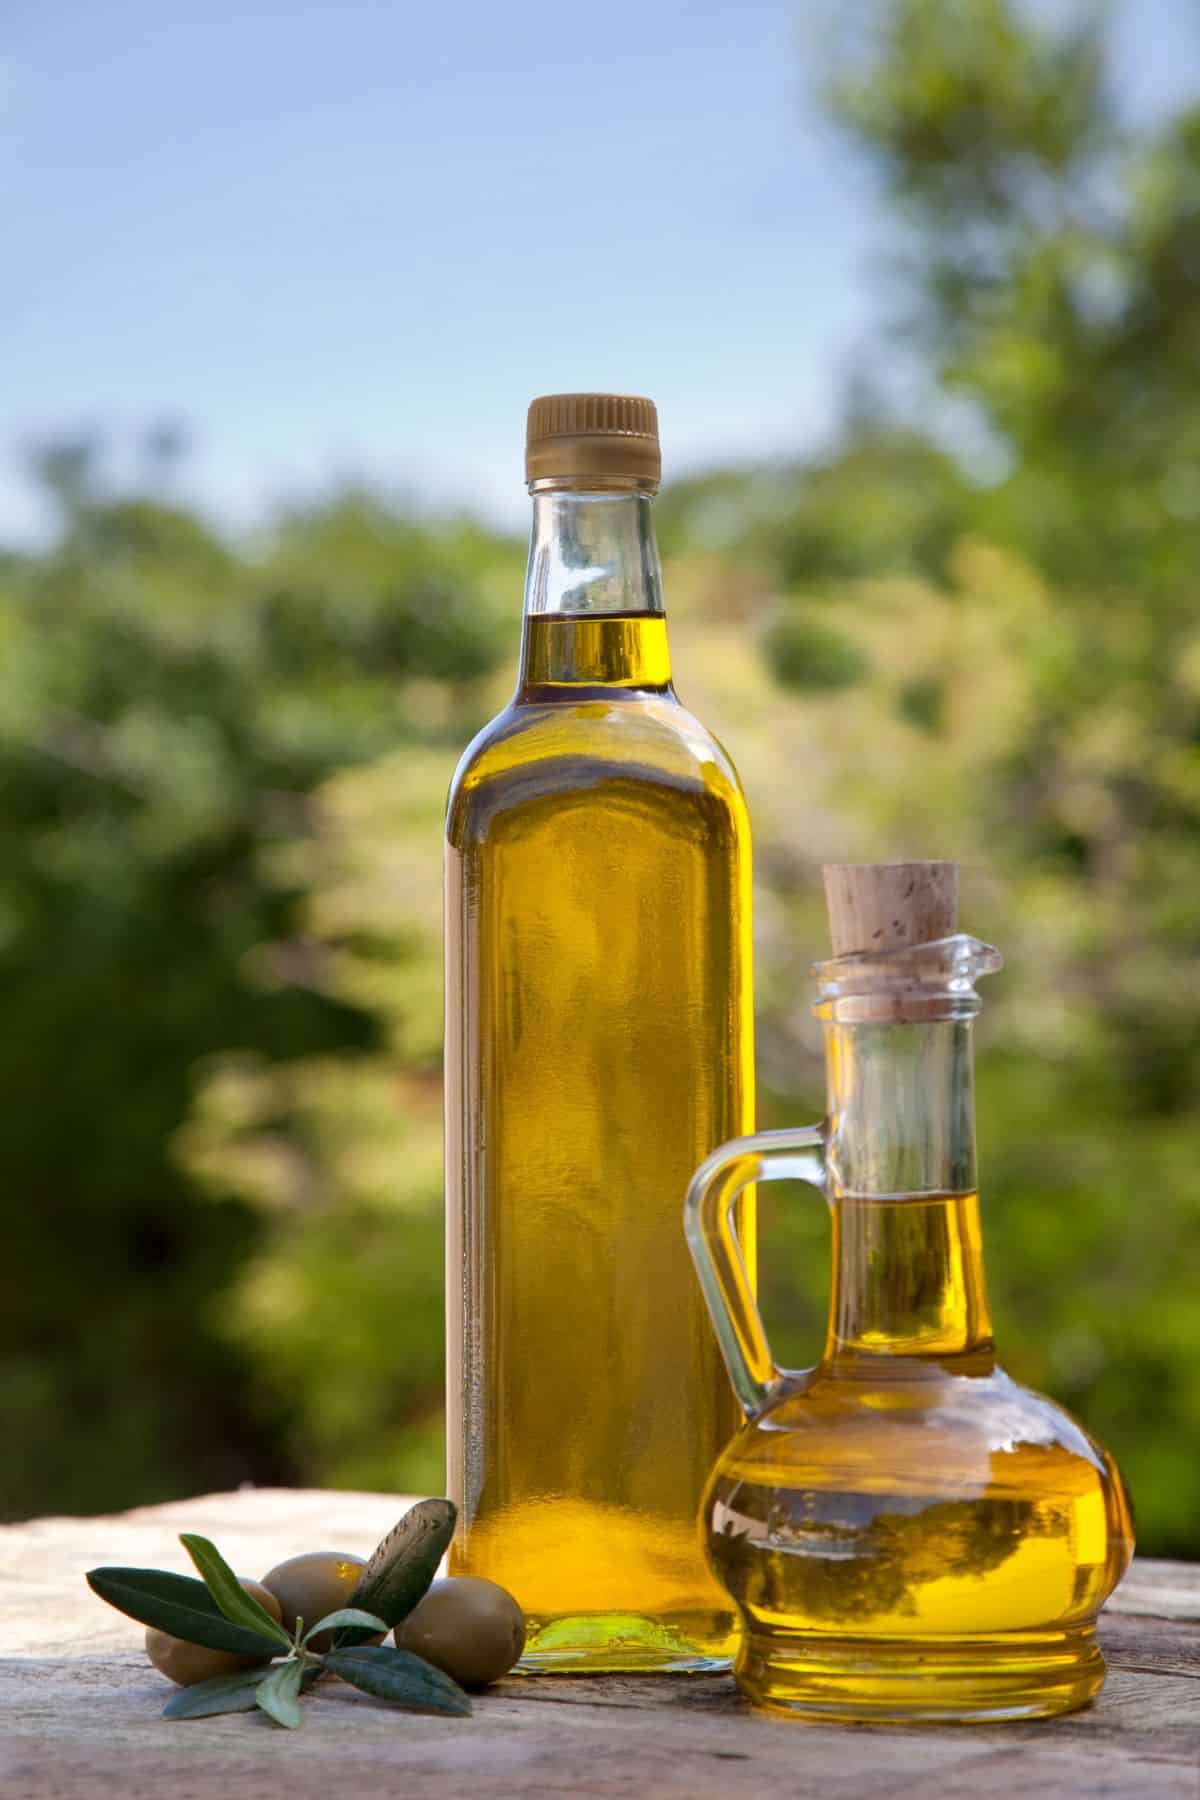 Jars of olive oil on wooden surface.